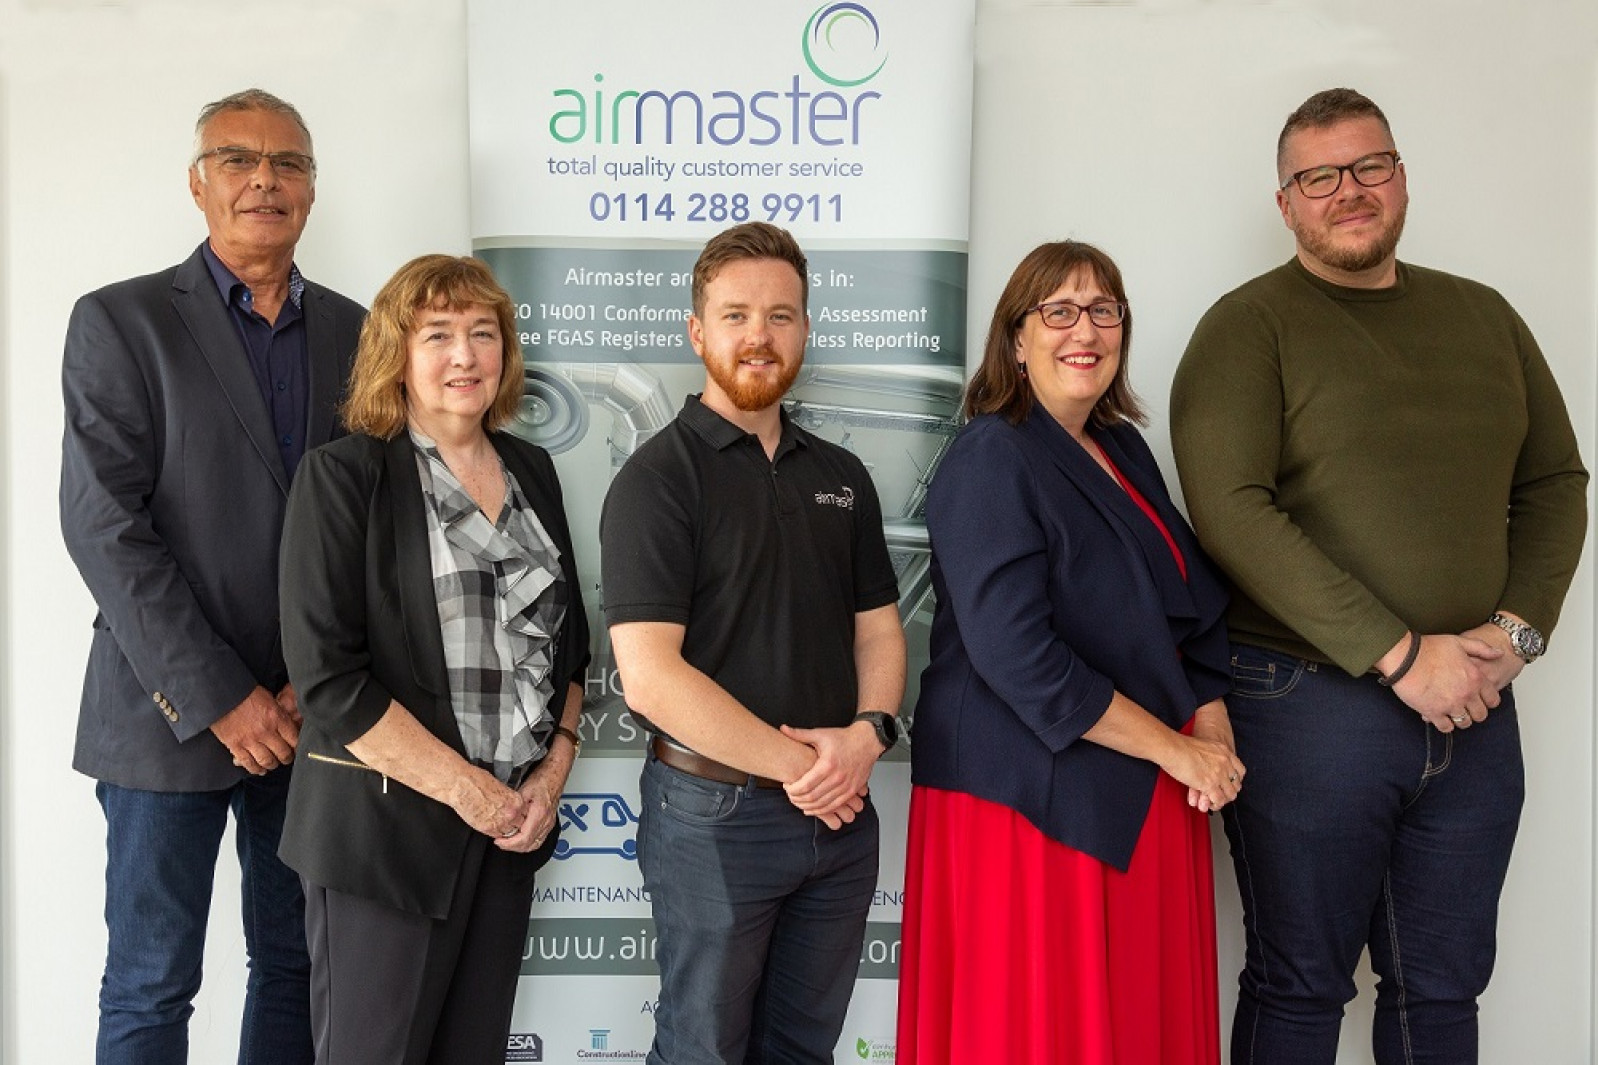 Agency in the Workplace: Airmaster - Article in No...